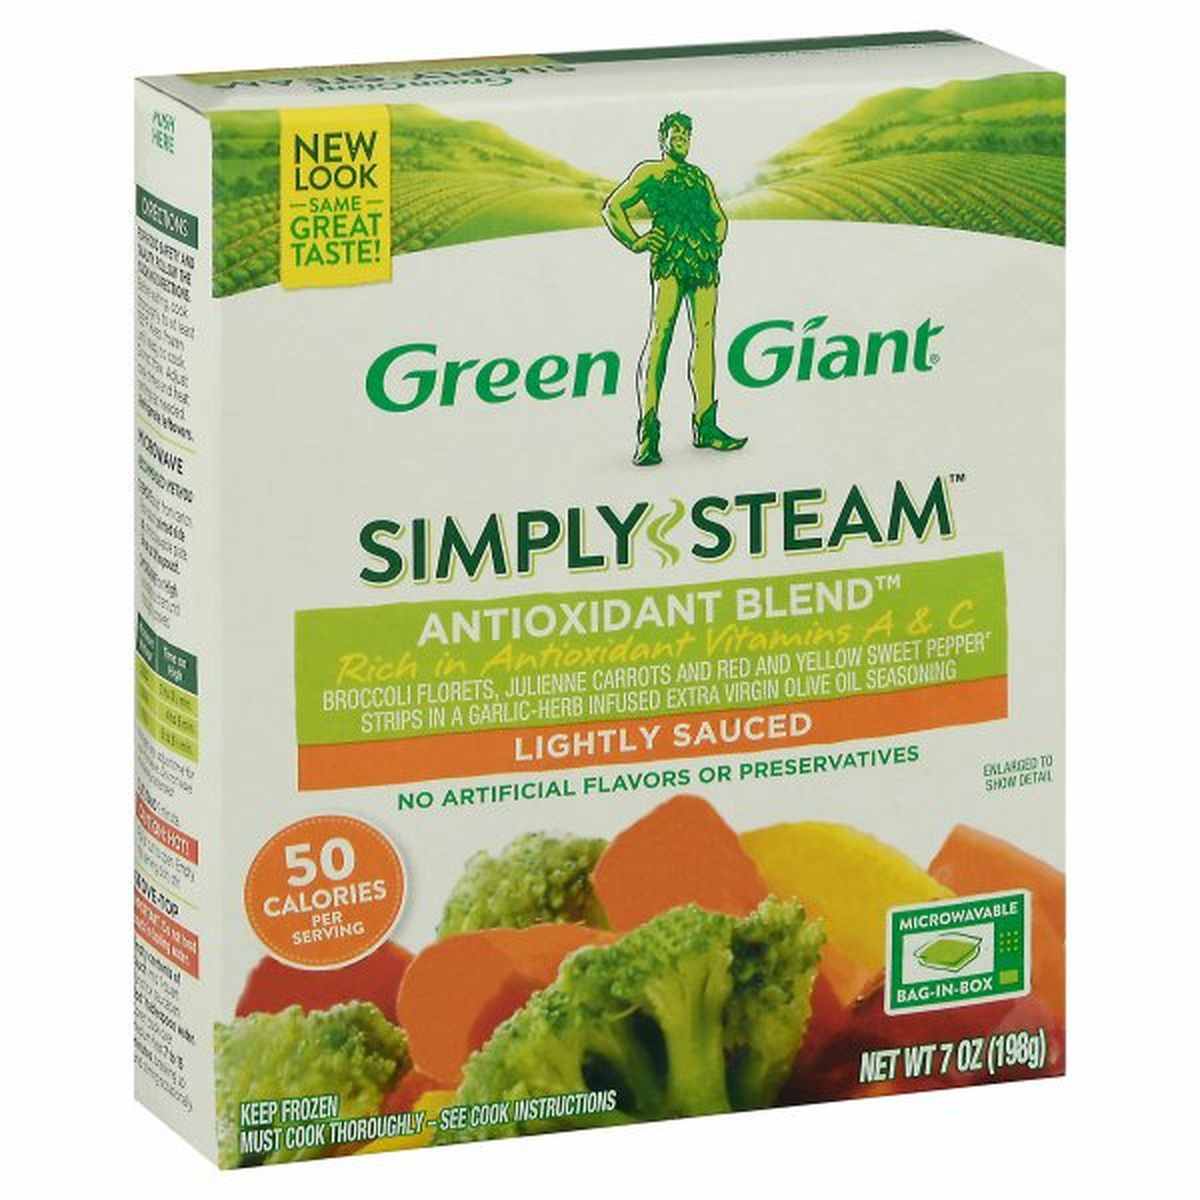 Calories in Green Giant Simply Steam Antioxidant Blend, Lightly Sauced